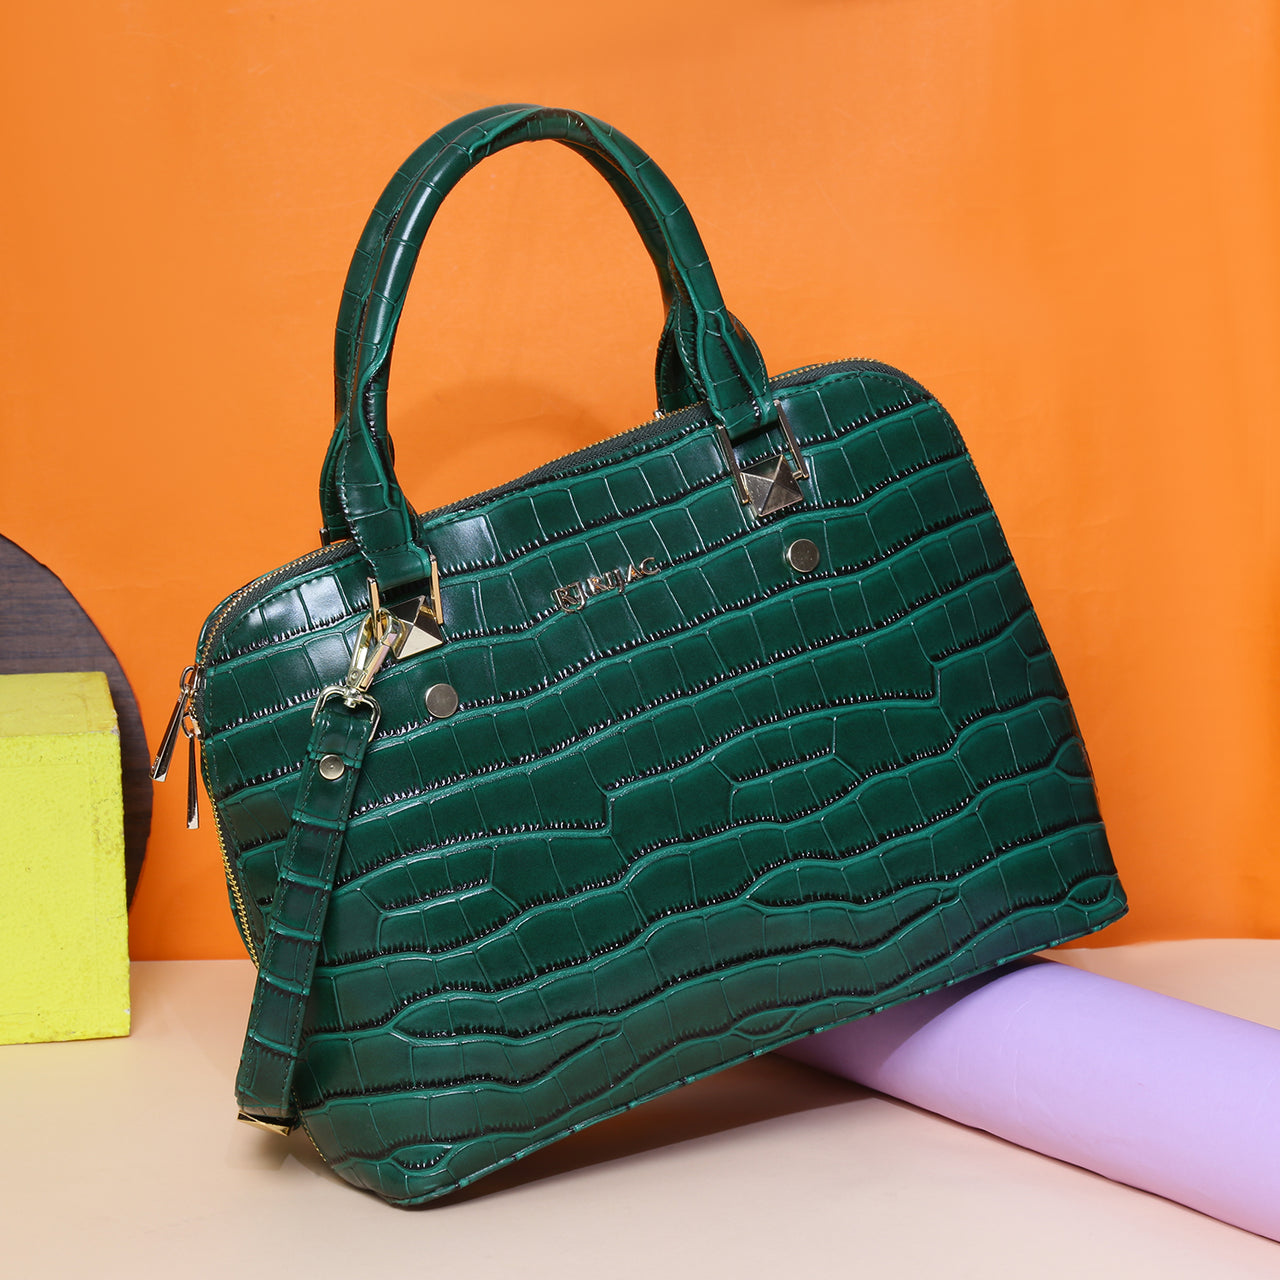 A green handbag on a colorful background.